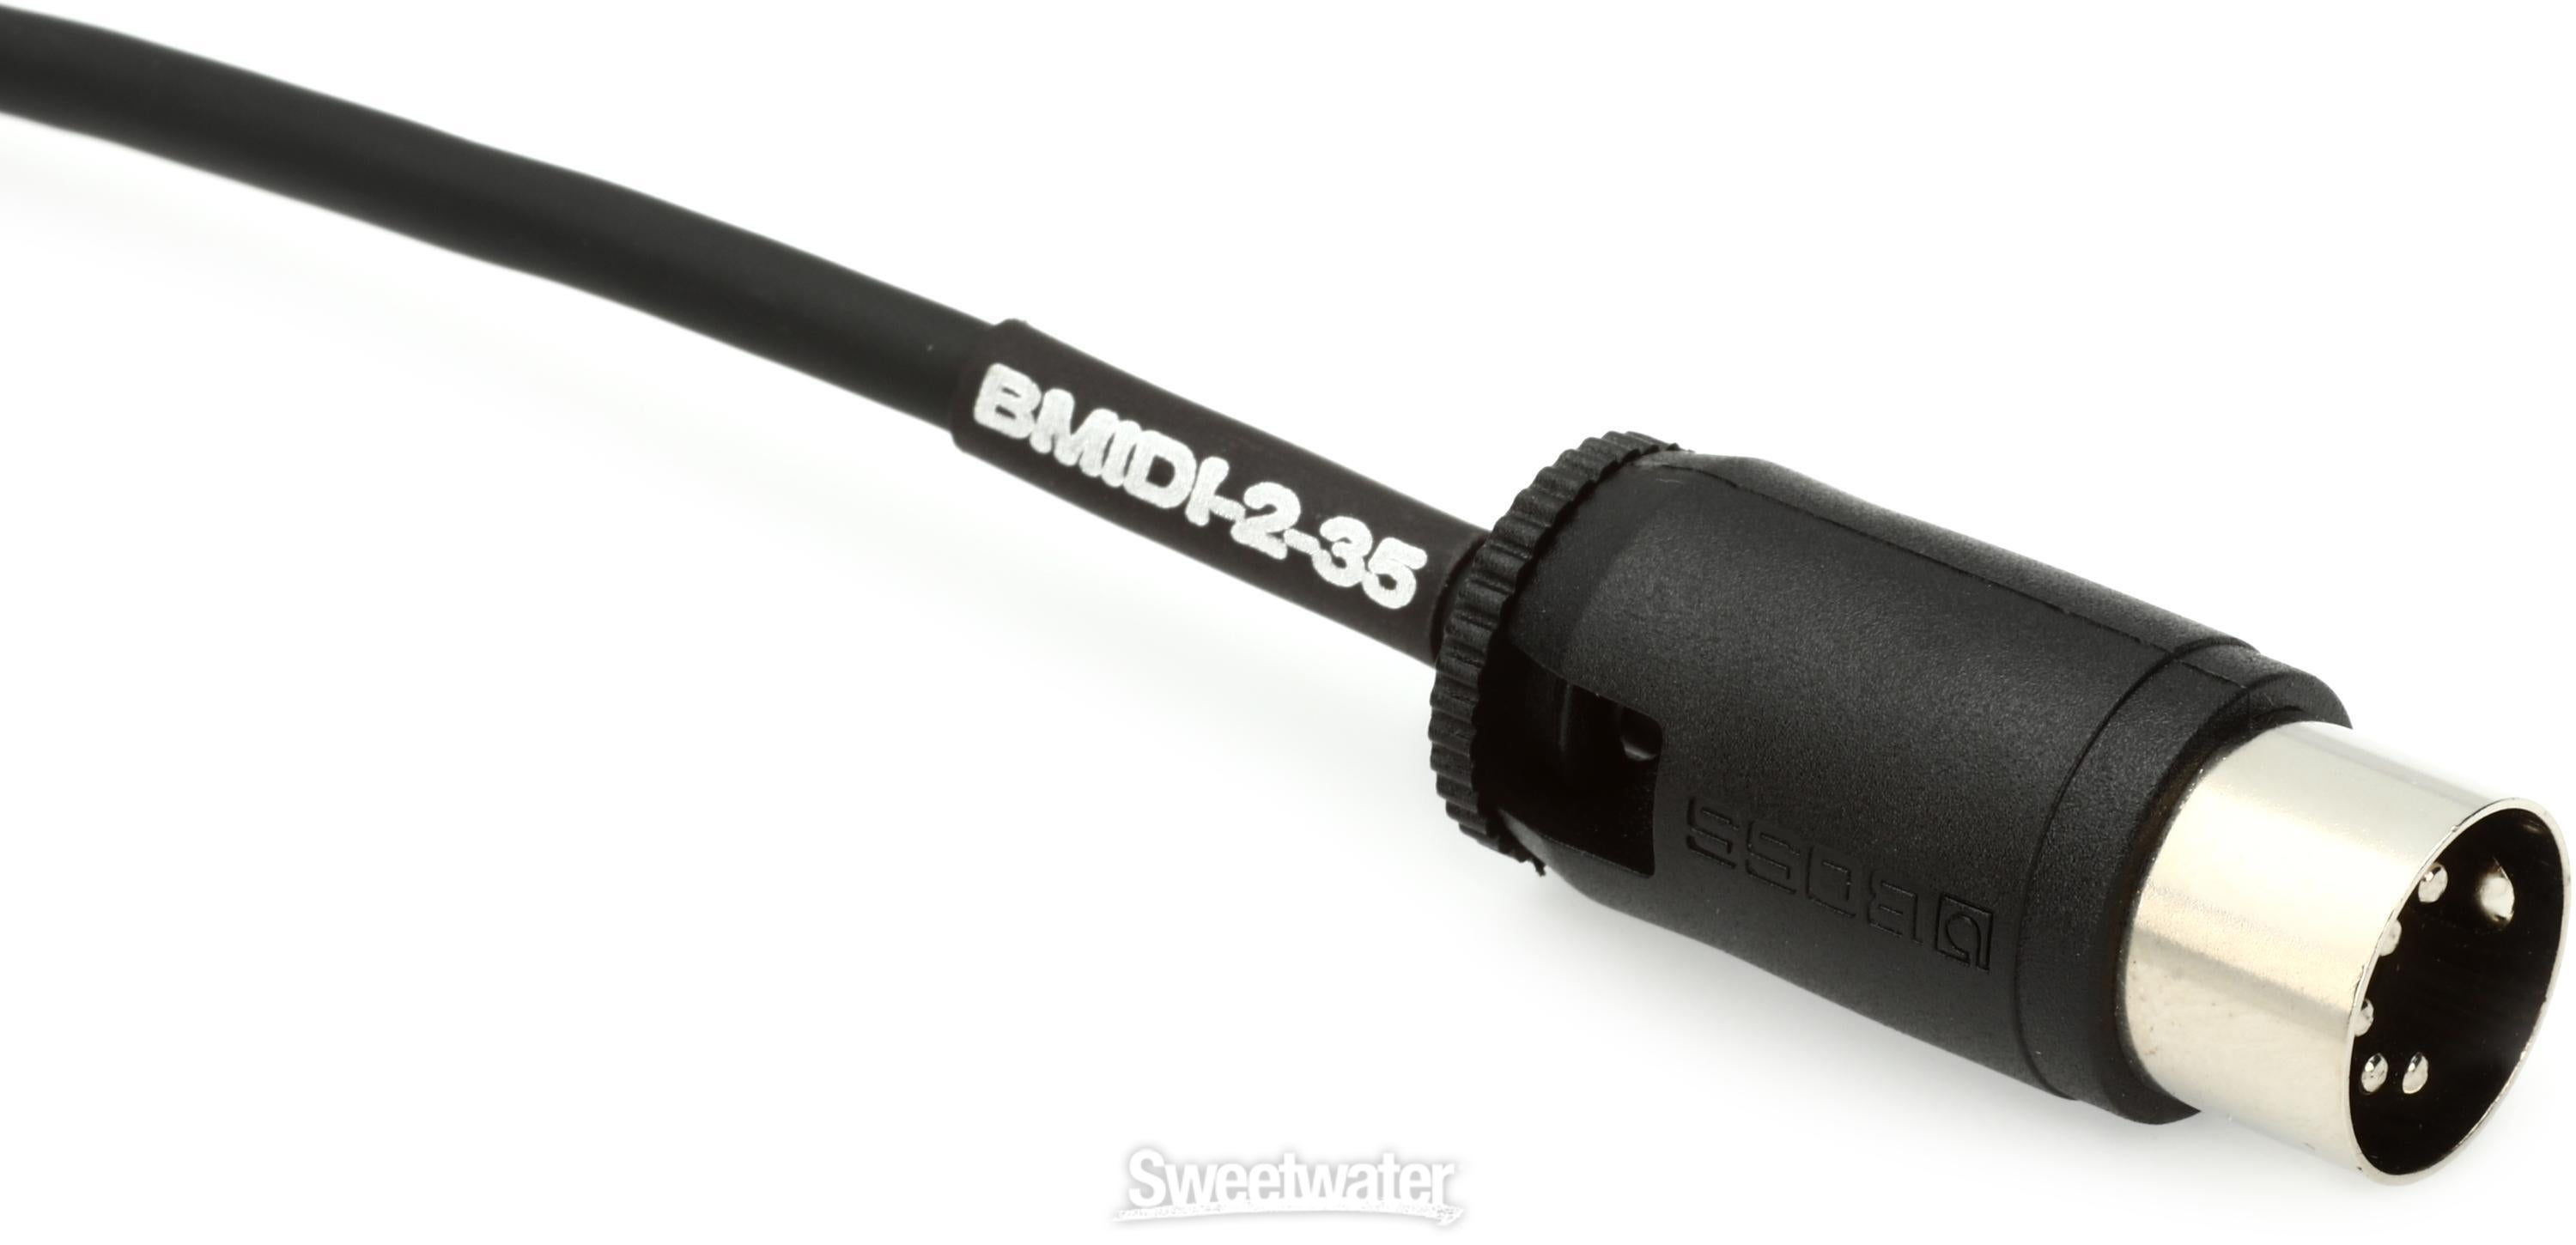 Boss BMIDI-2-35 Type A 3.5mm TRS to Male 5-pin DIN MIDI Cable - 2 foot |  Sweetwater